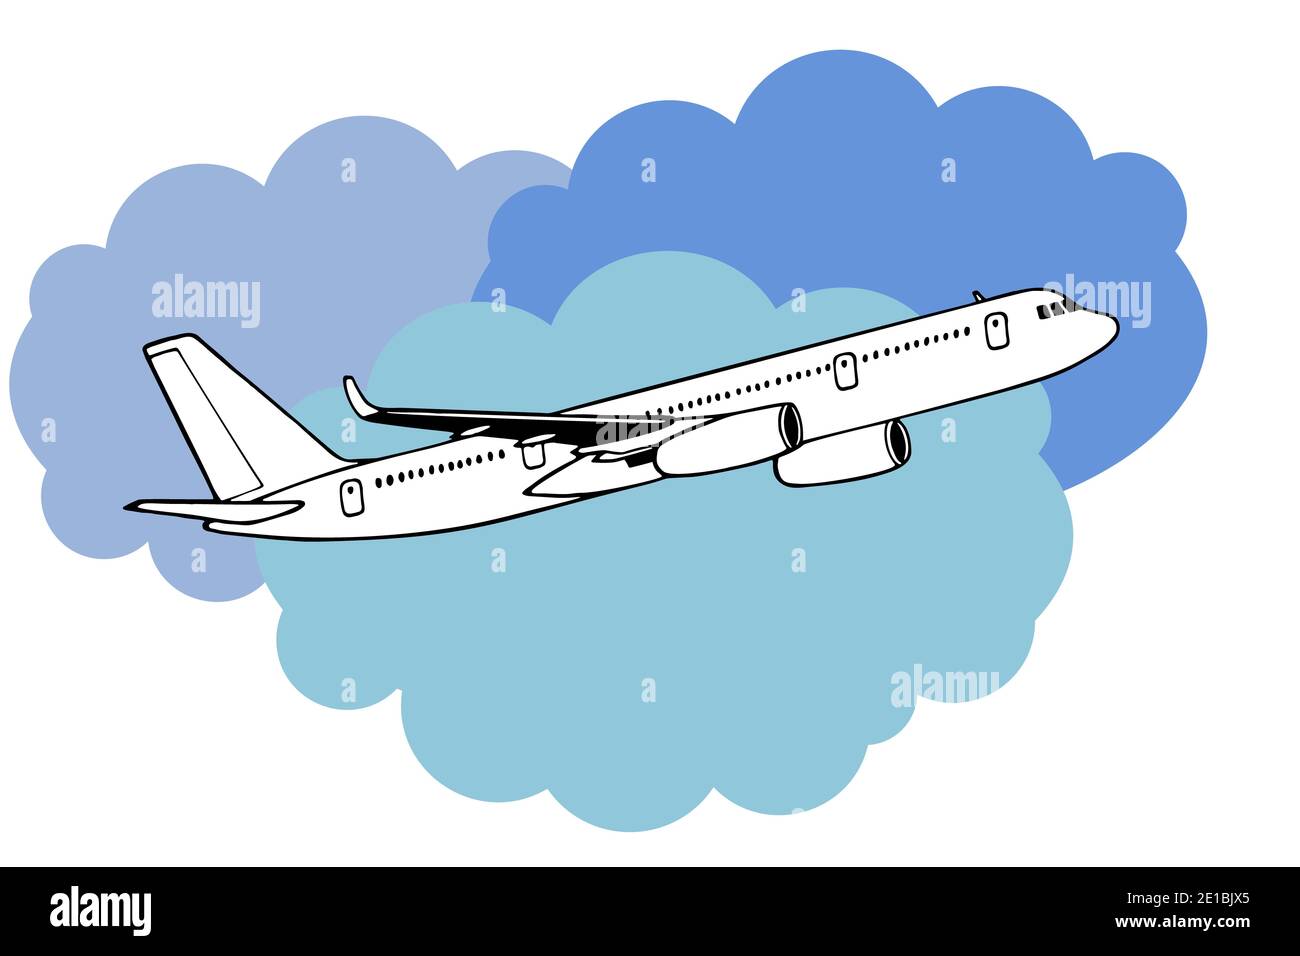 Jetliner hand drawn realistic doodle sketch tracing vector llustration. Airline Concept Travel Passenger plane. Jet commercial airplane against the ba Stock Photo